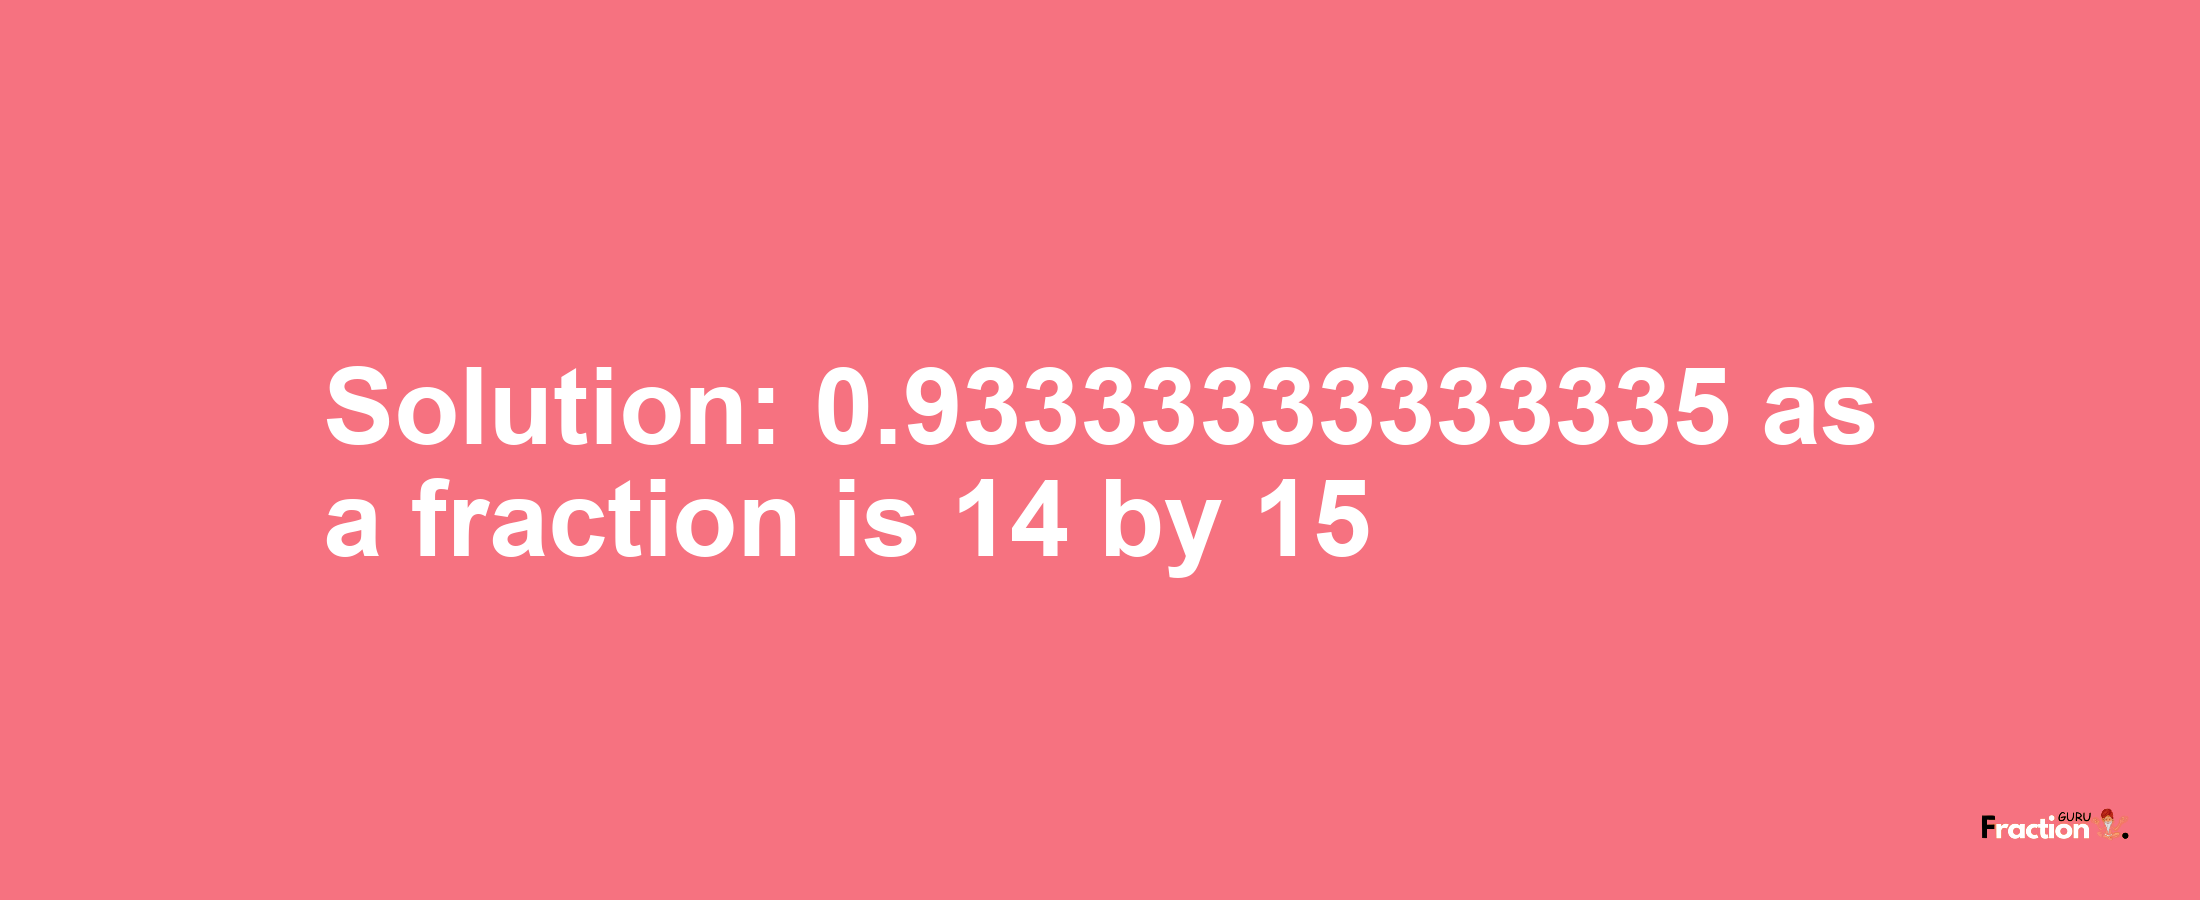 Solution:0.93333333333335 as a fraction is 14/15